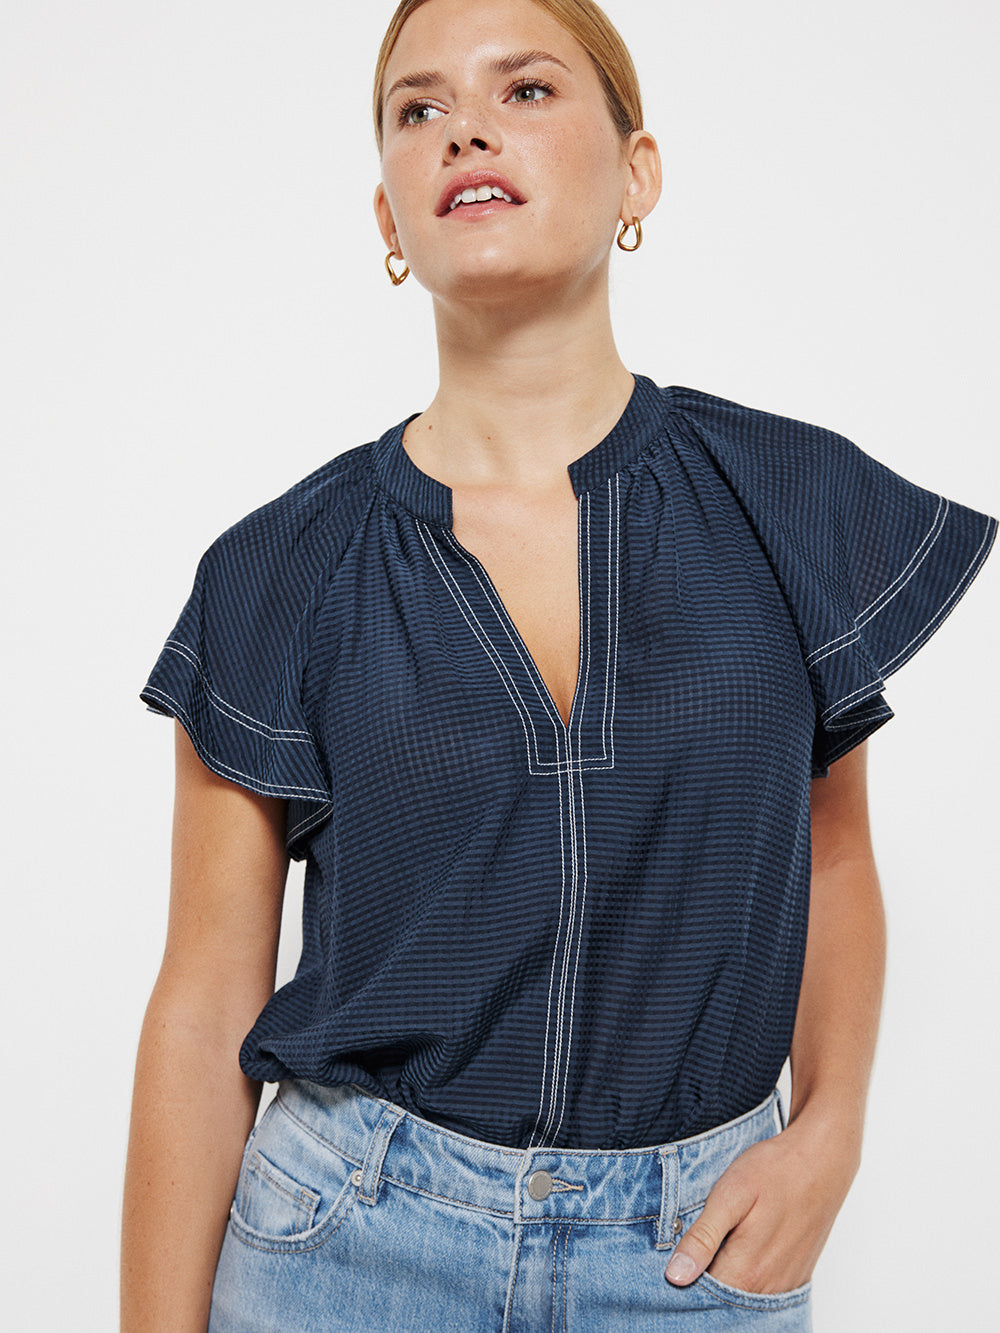 The Contrast Stitch Top